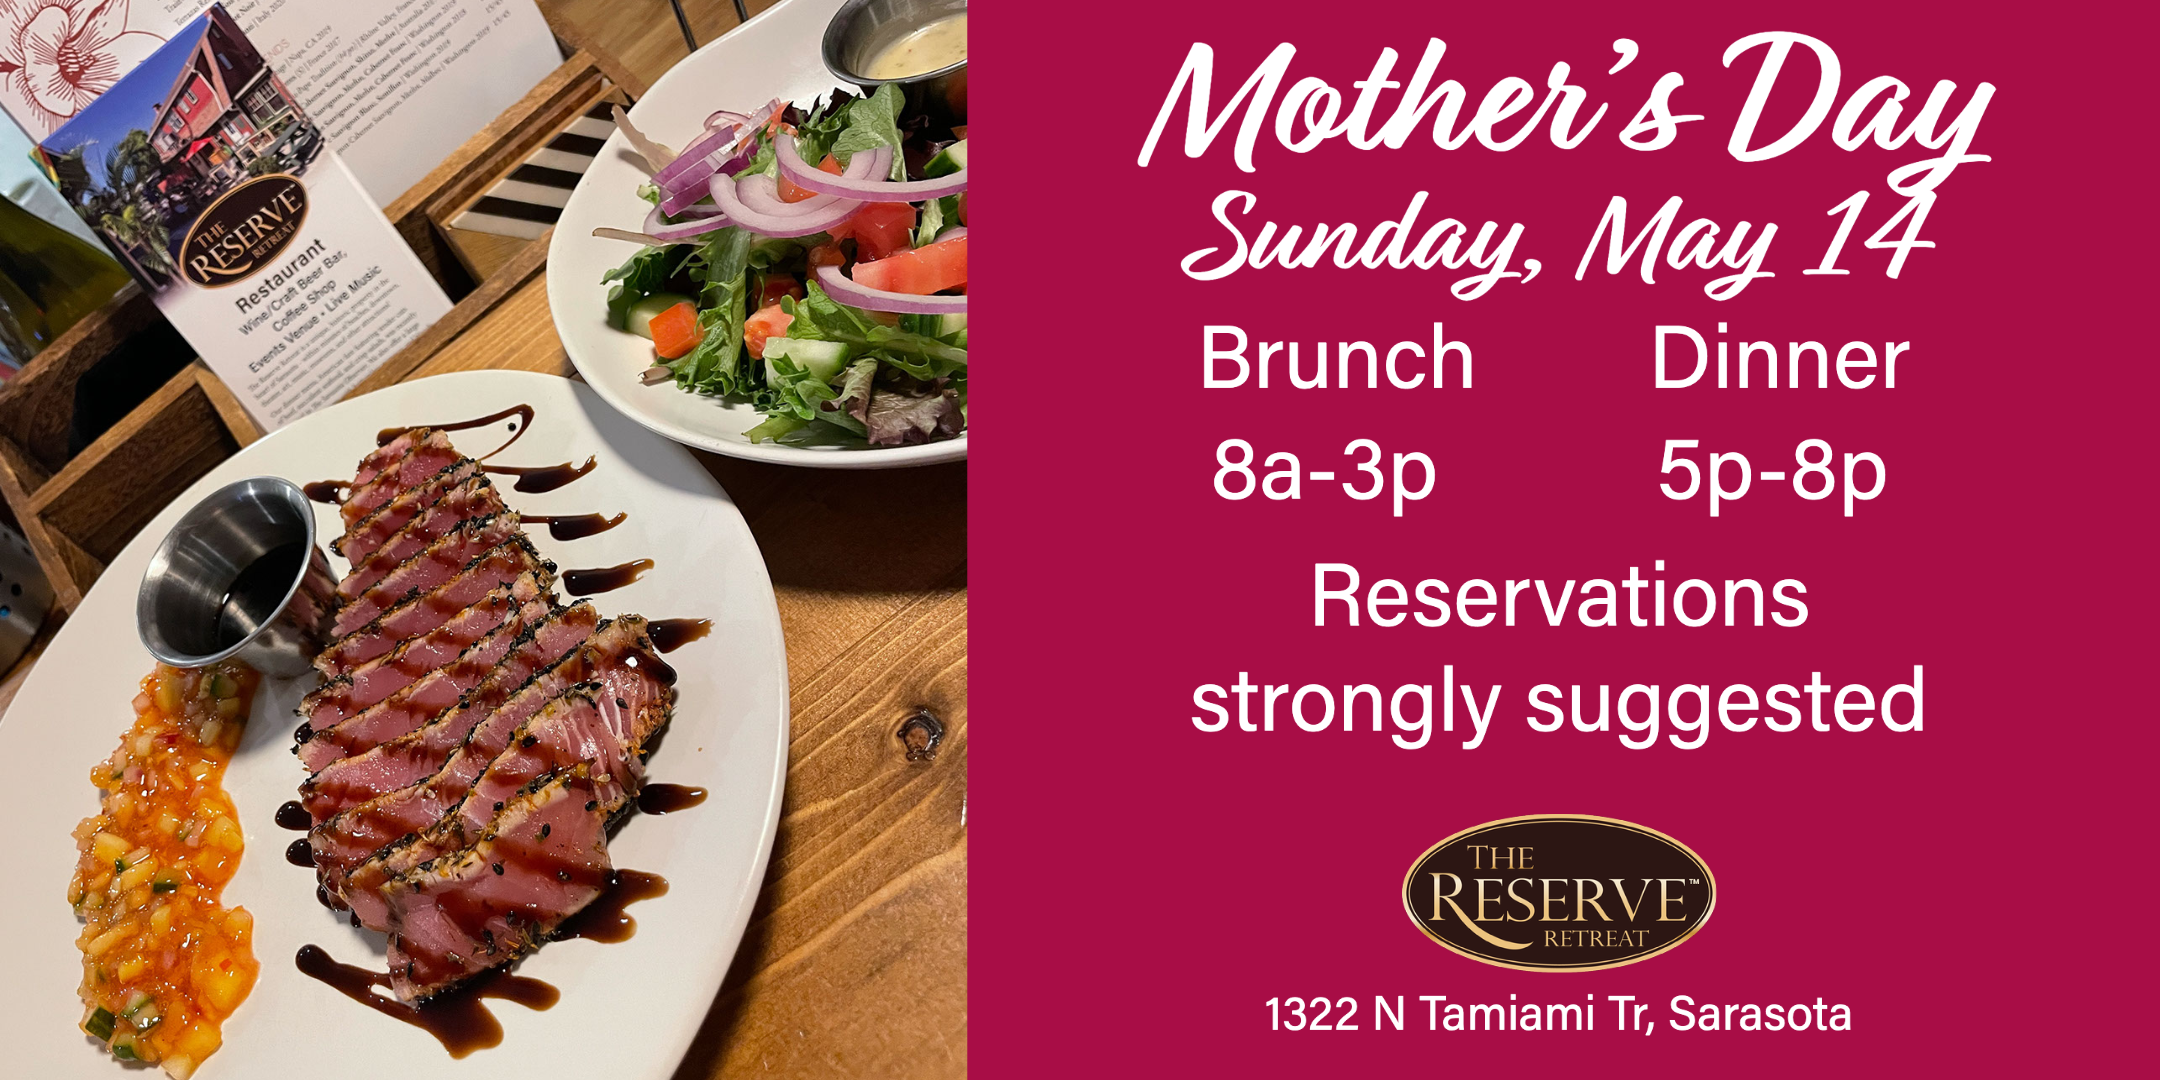 Treat your mom to the best brunch and/or dinner in town at The Reserve Retreat in Sarasota